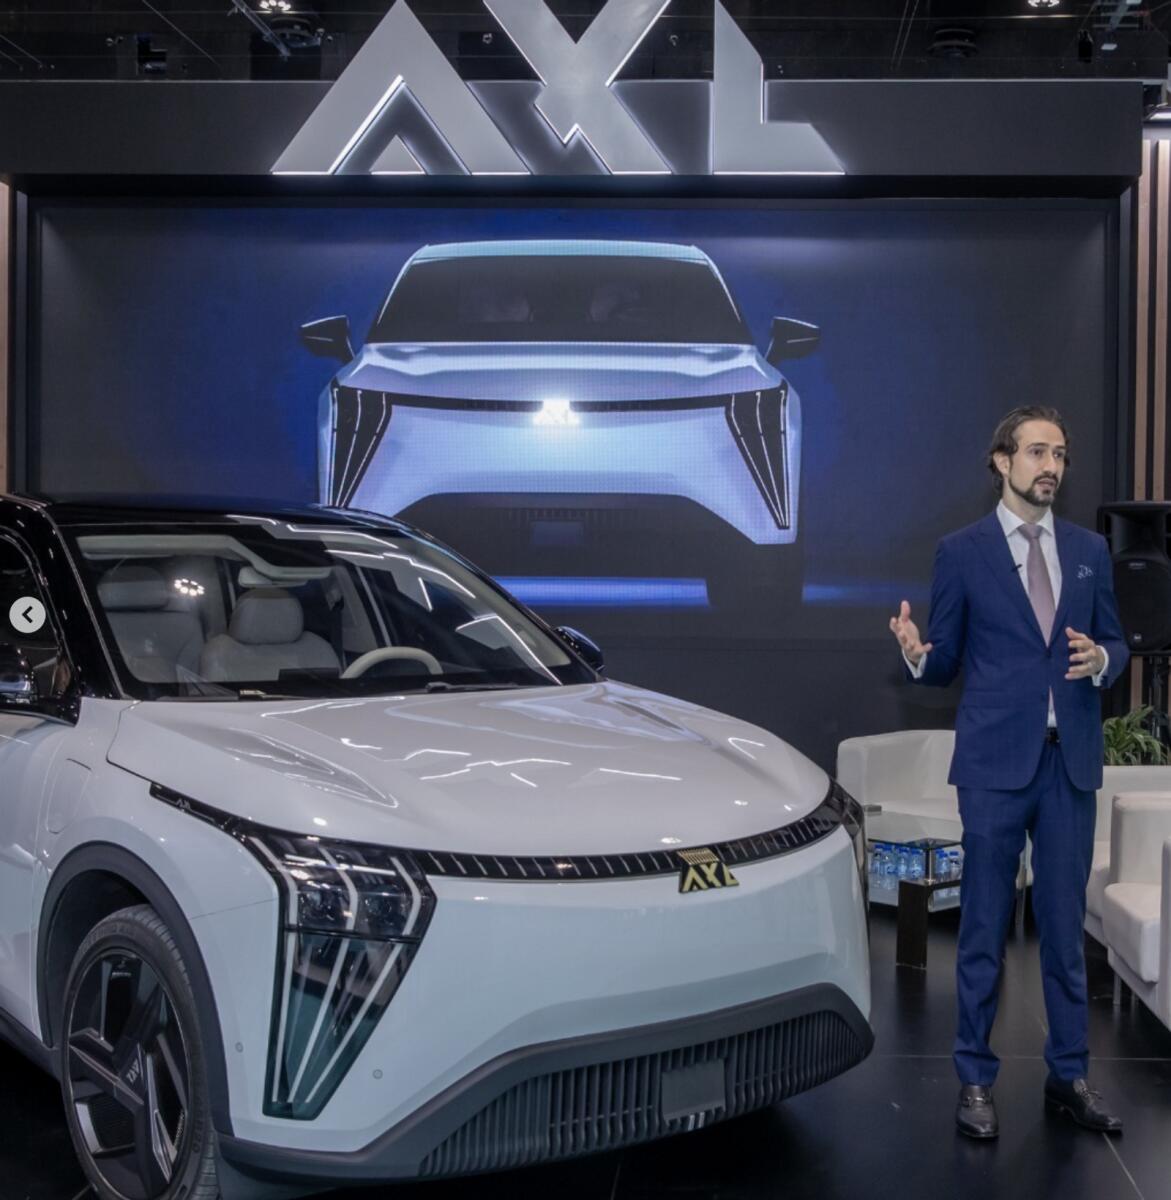 Ali Eslami, CEO of AXL Electric Vehicles, at the world premiere of its new electric mid-sized SUV Sharx-5 in Dubai. Photo: Supplied